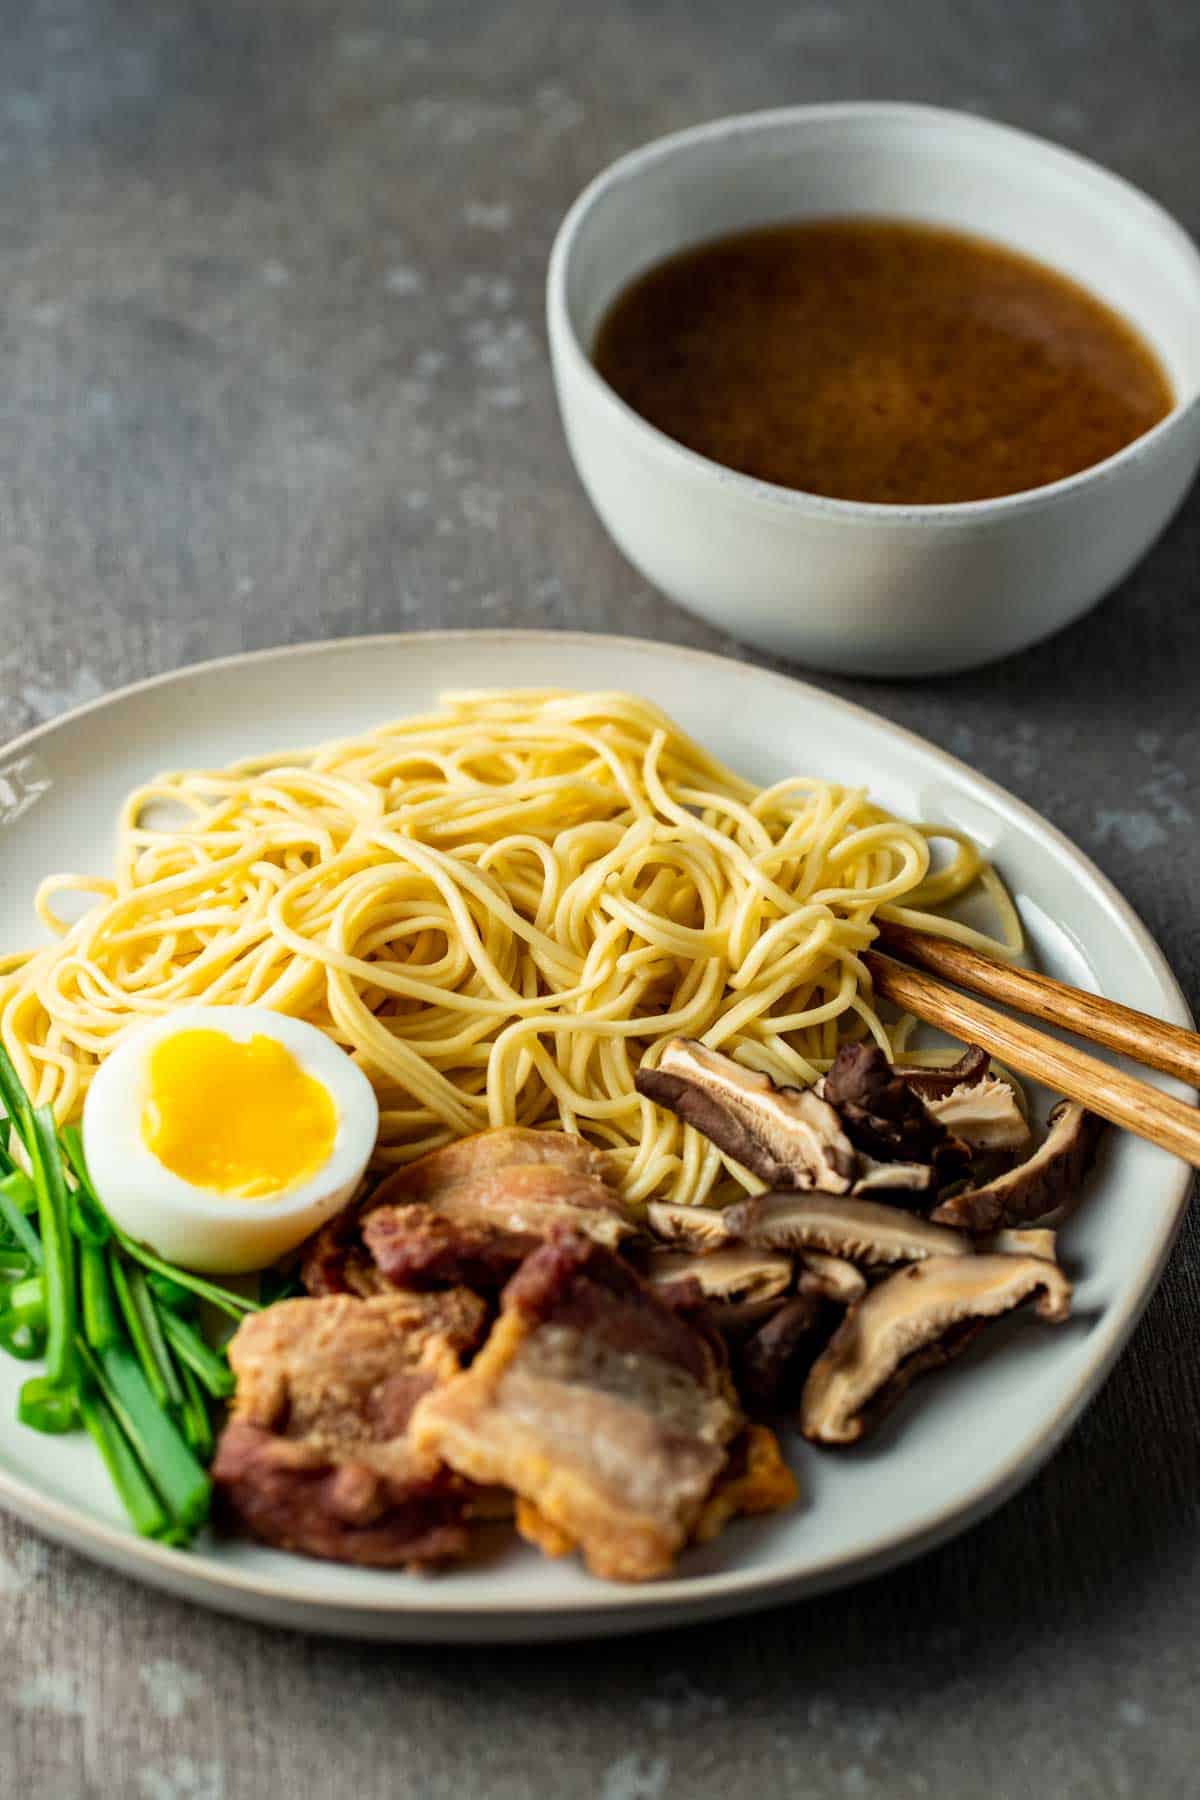 chopsticks on a plate with noodles, pork belly, egg and green onions awith a bowl of broth in the background